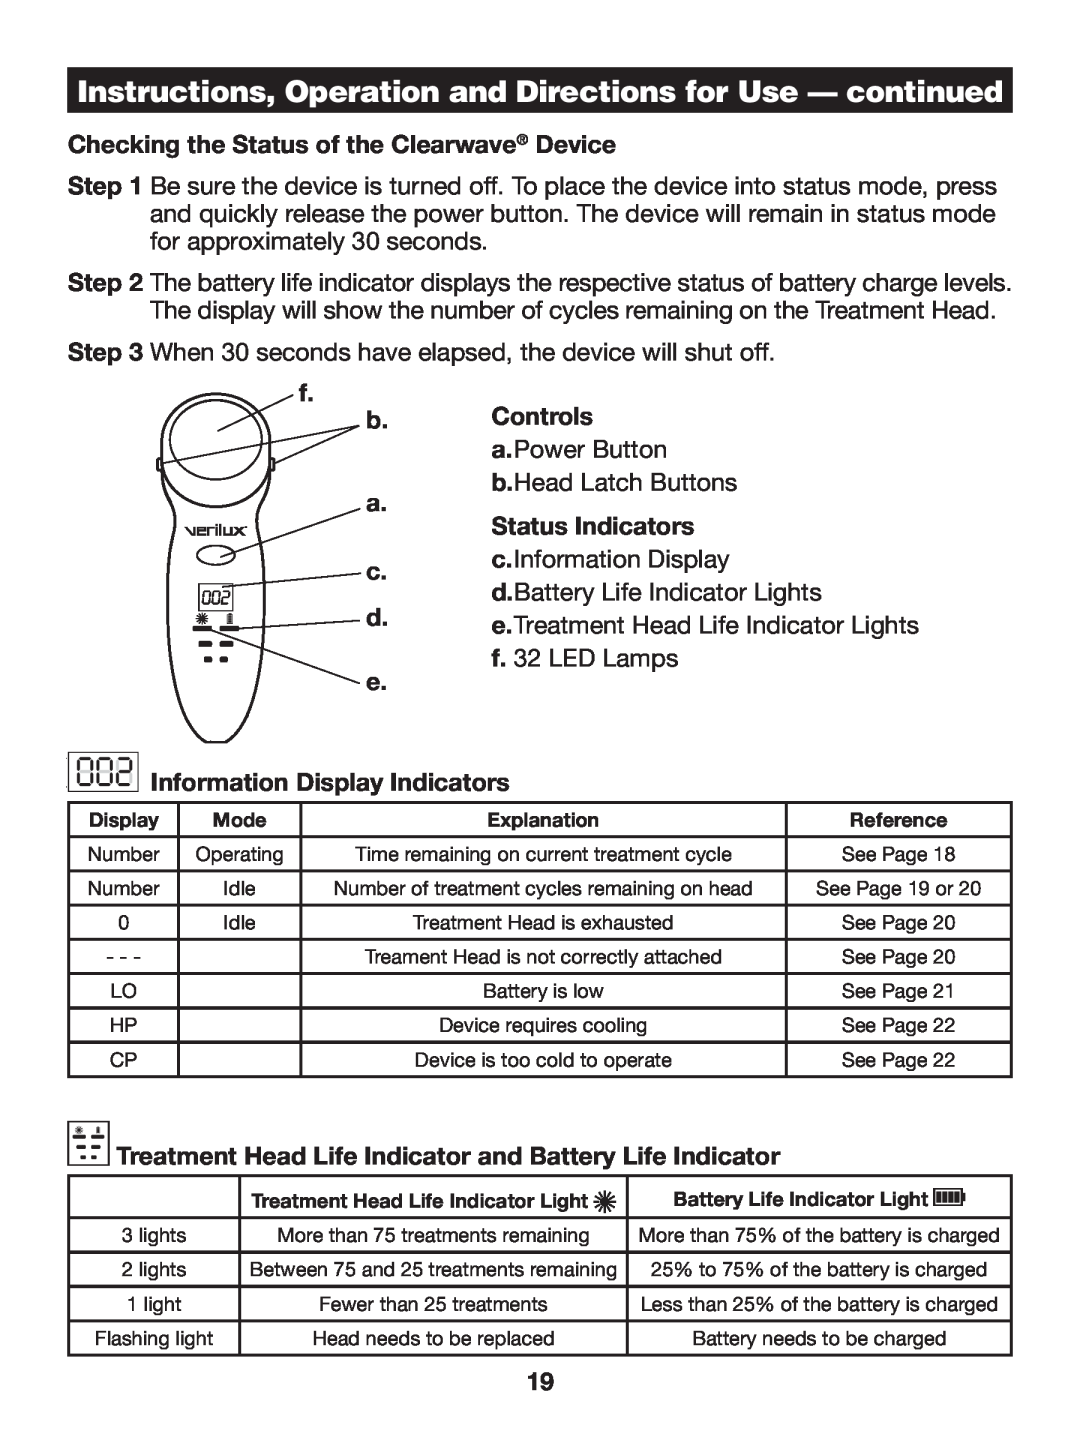 Verilux CW01 manual Instructions, Operation and Directions for Use - continued, Checking the Status of the Clearwave Device 